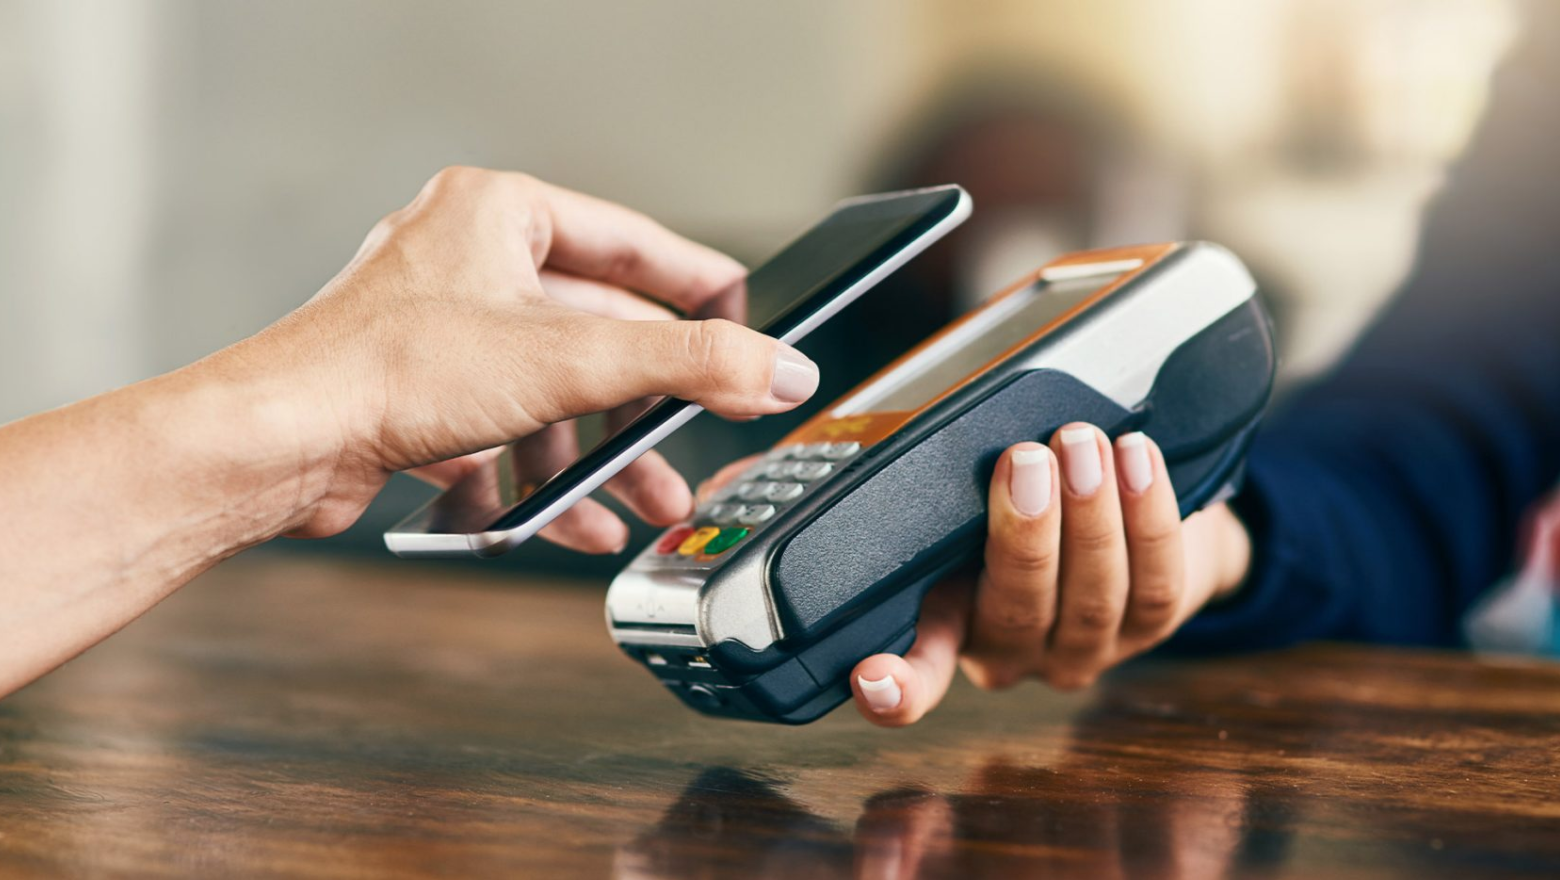 Five predictions for the future of contactless payment